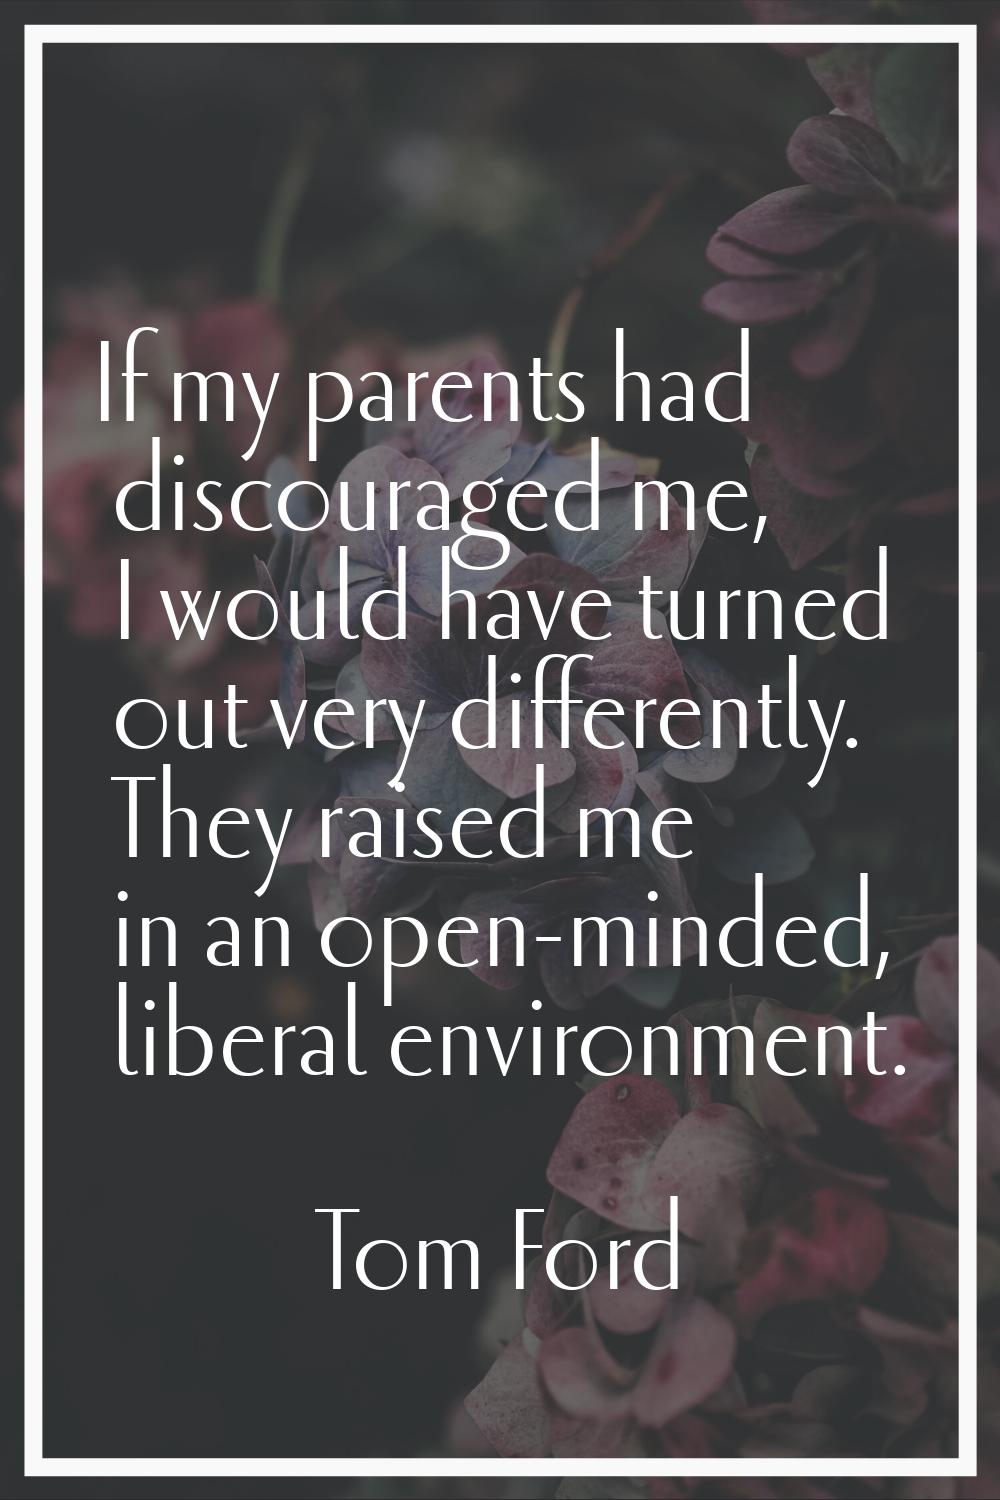 If my parents had discouraged me, I would have turned out very differently. They raised me in an op